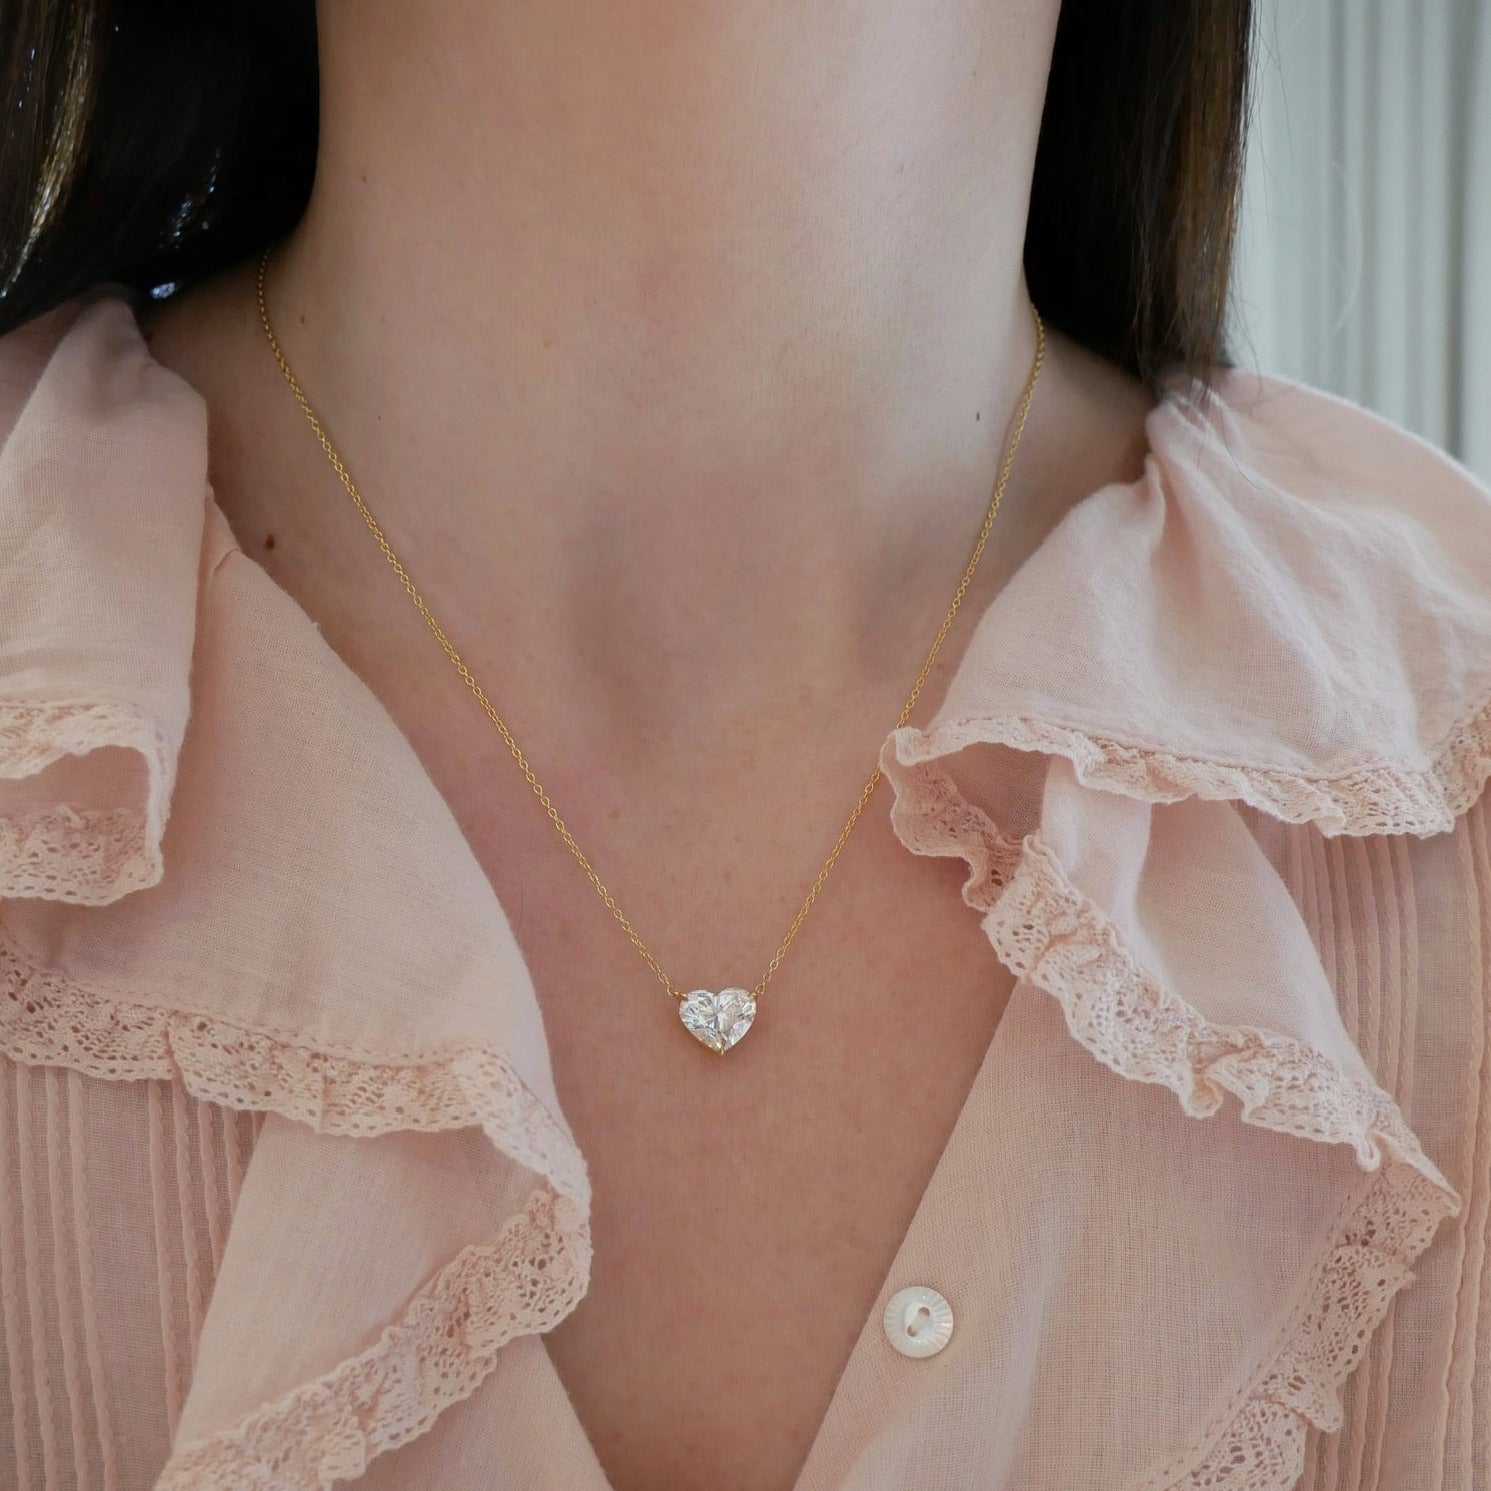 Diamond Heart Solitaire Necklace with 3 carat diamond with yellow gold chain styled on neck of model in pink blouse